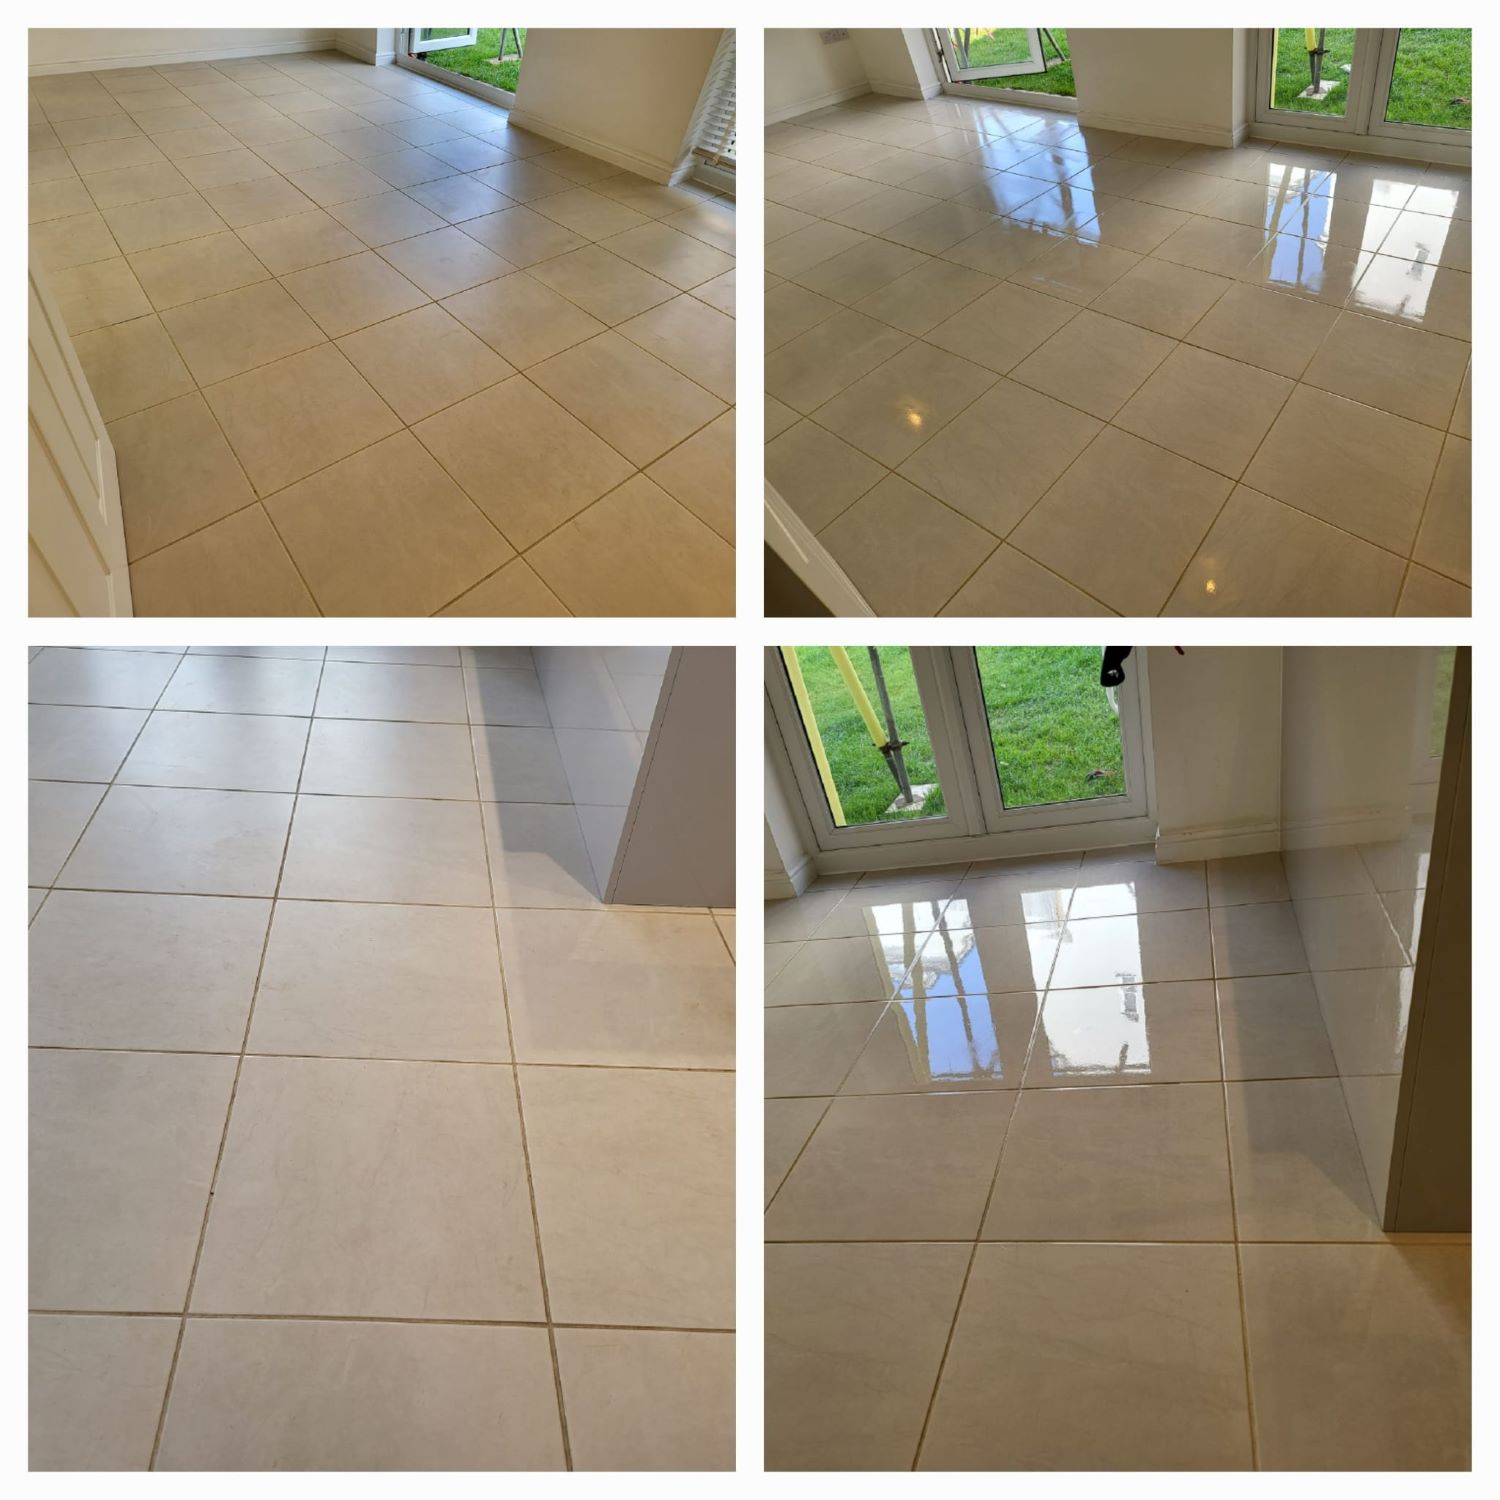 Before and after images of cleaning domestic tiled floor